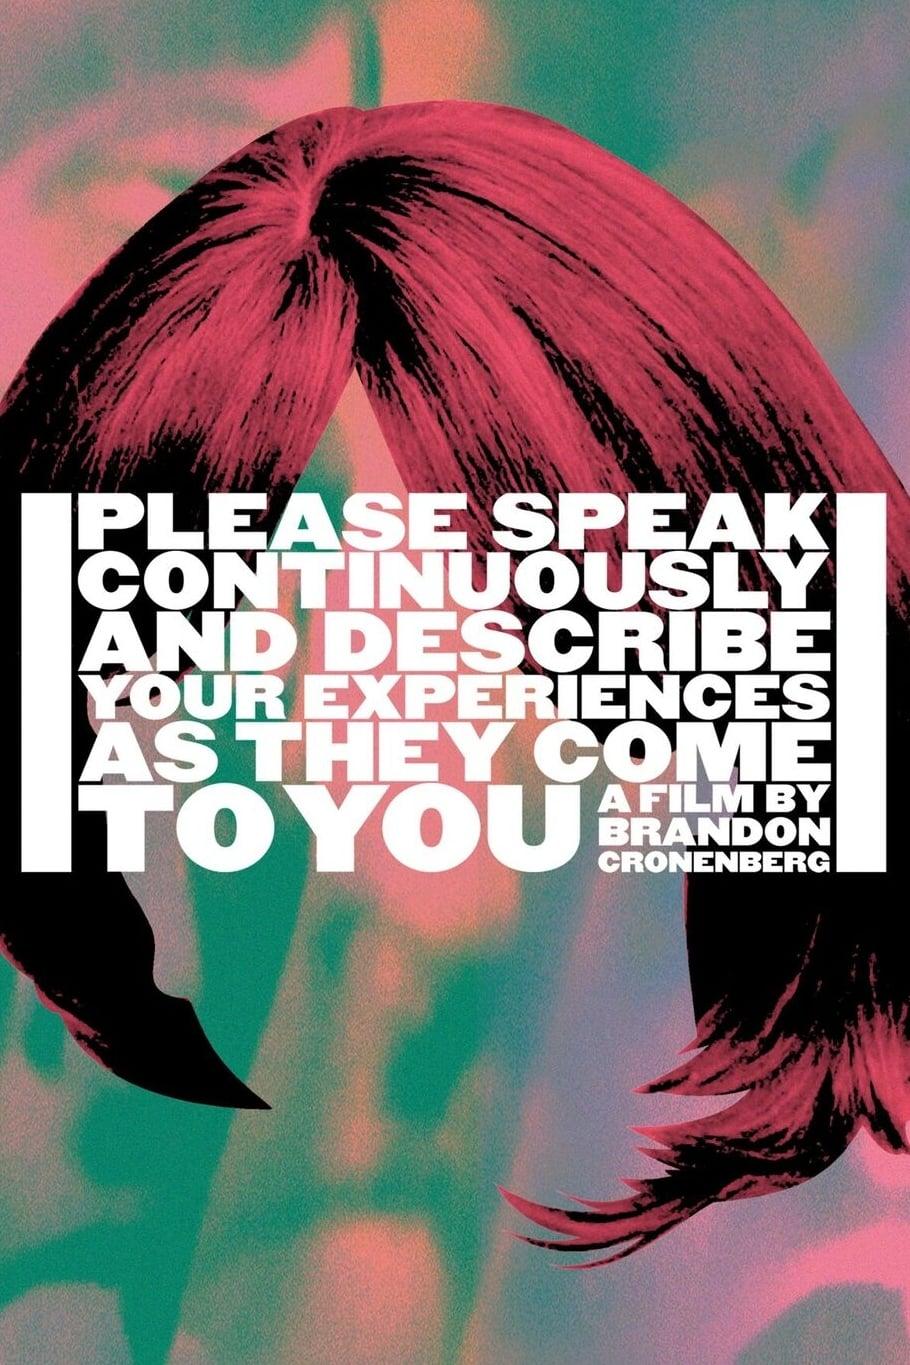 Please Speak Continuously and Describe Your Experiences as They Come to You poster